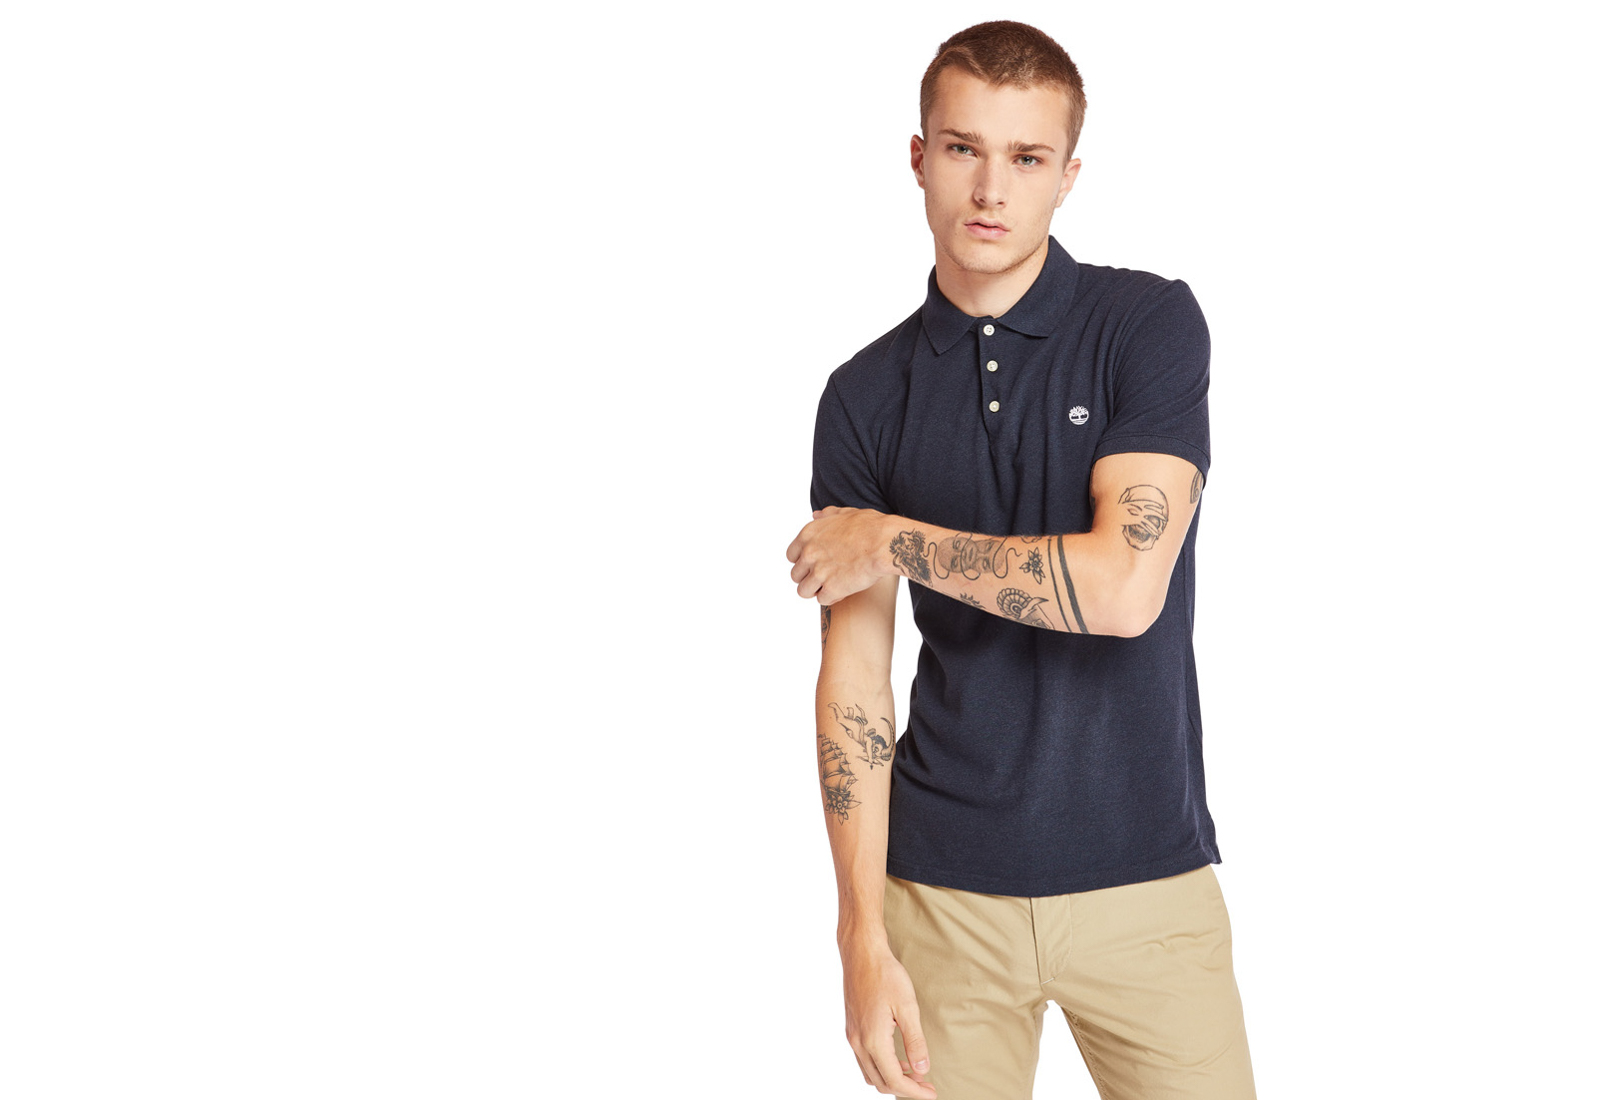 Timberland Haine Ss Stretch Polo